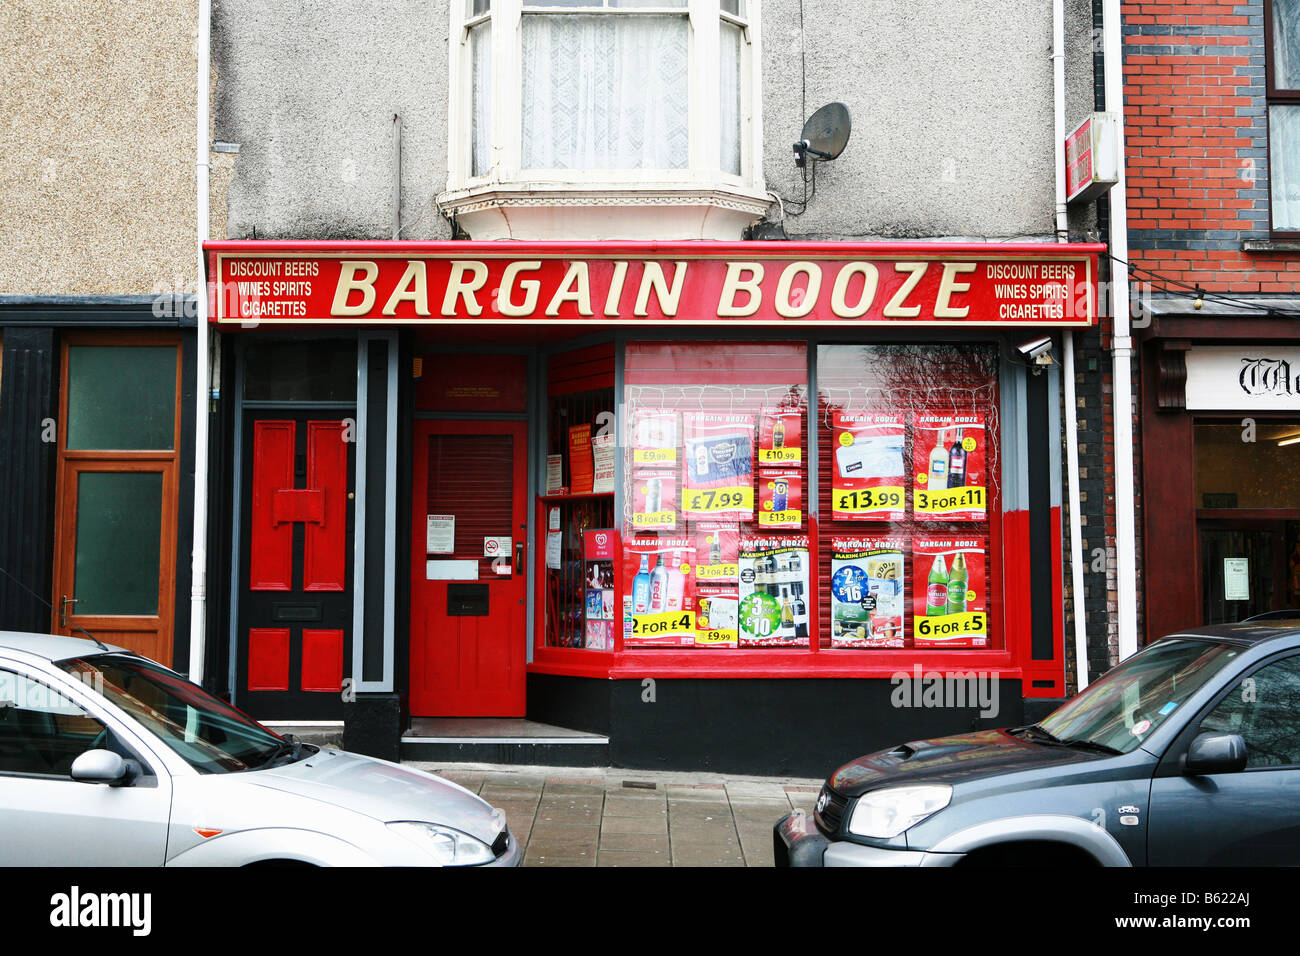 Typical bargain booze cheap alcohol drink shop retail store on UK town centre high street selling discounted alcoholic beverages Stock Photo